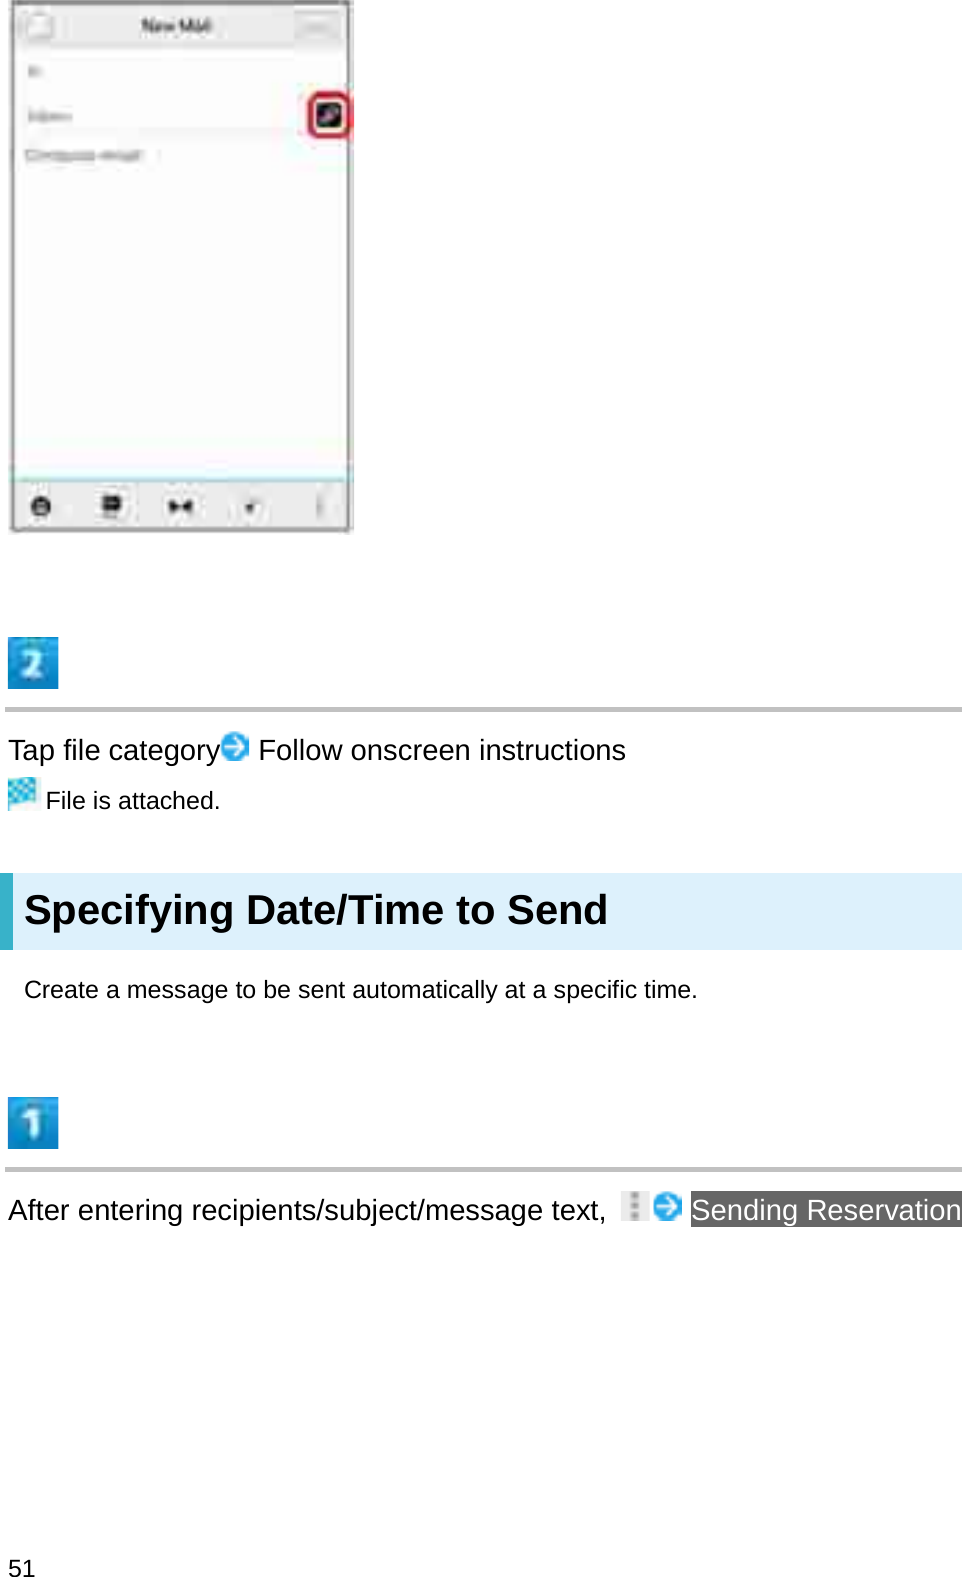 Tap file category Follow onscreen instructionsFile is attached.Specifying Date/Time to SendCreate a message to be sent automatically at a specific time.After entering recipients/subject/message text,  Sending Reservation51